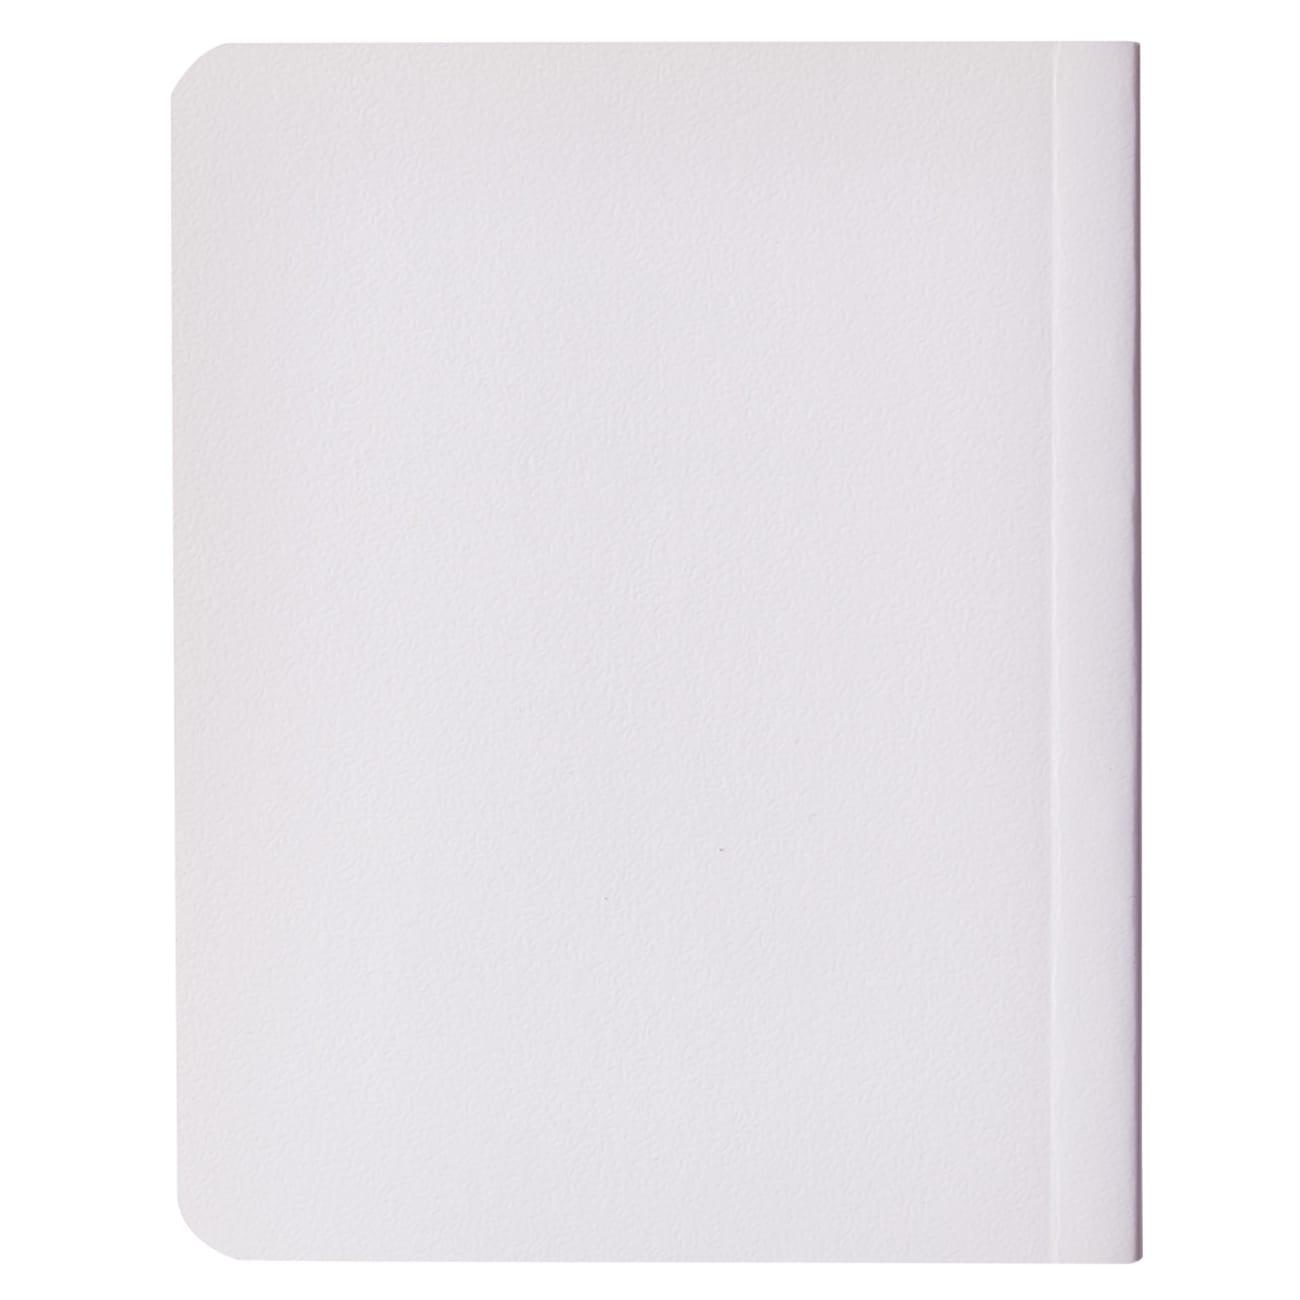 My Book of Bible Promises (White) Imitation Leather